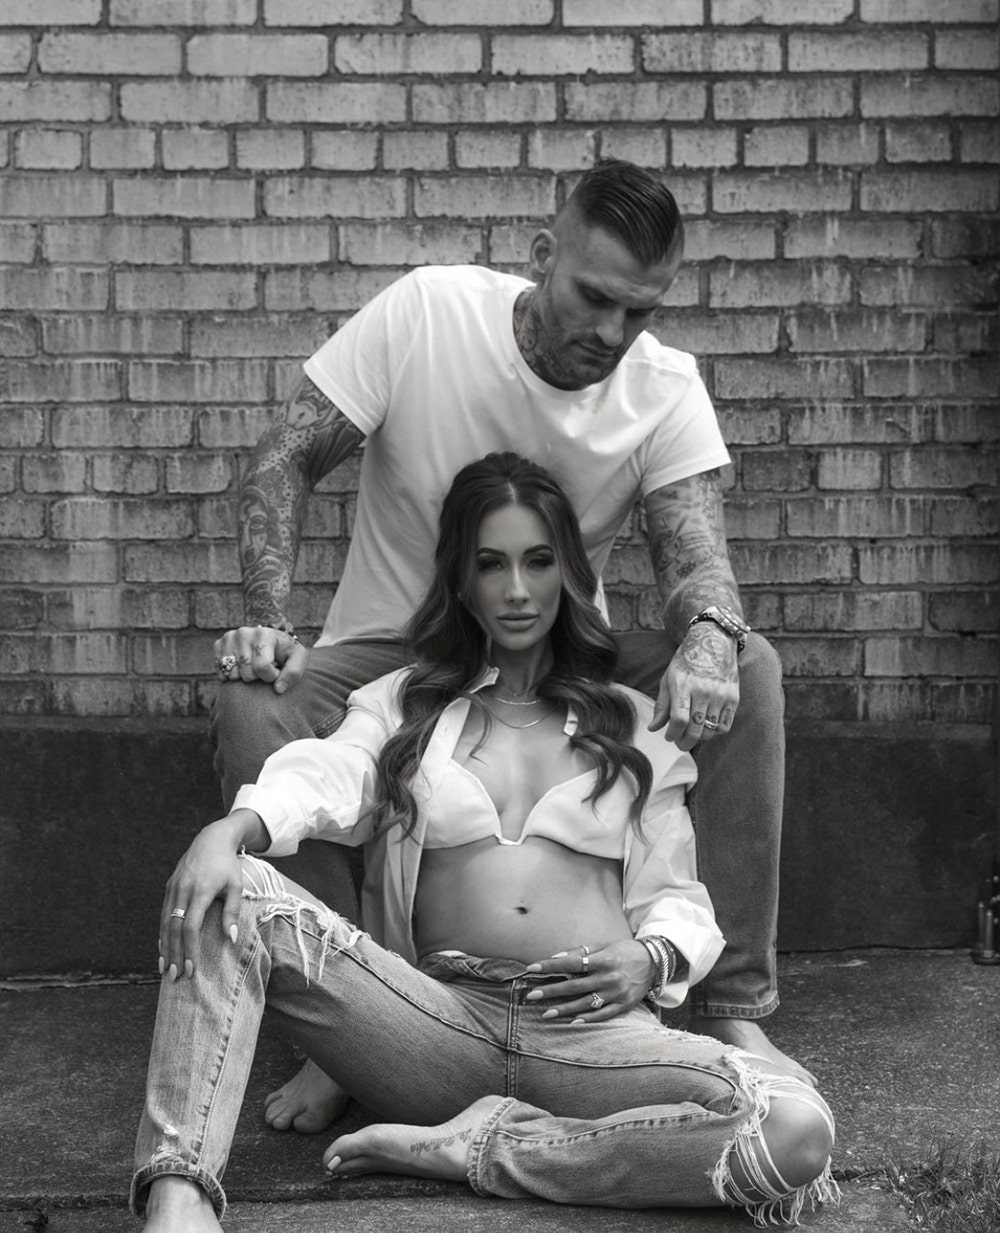 Leah Van Dale wearing a white bikini top with an open white blouse and sleeves sitting down with Matt Polinsky sitting above her wearing a white shirt and jeans in a black and white photo